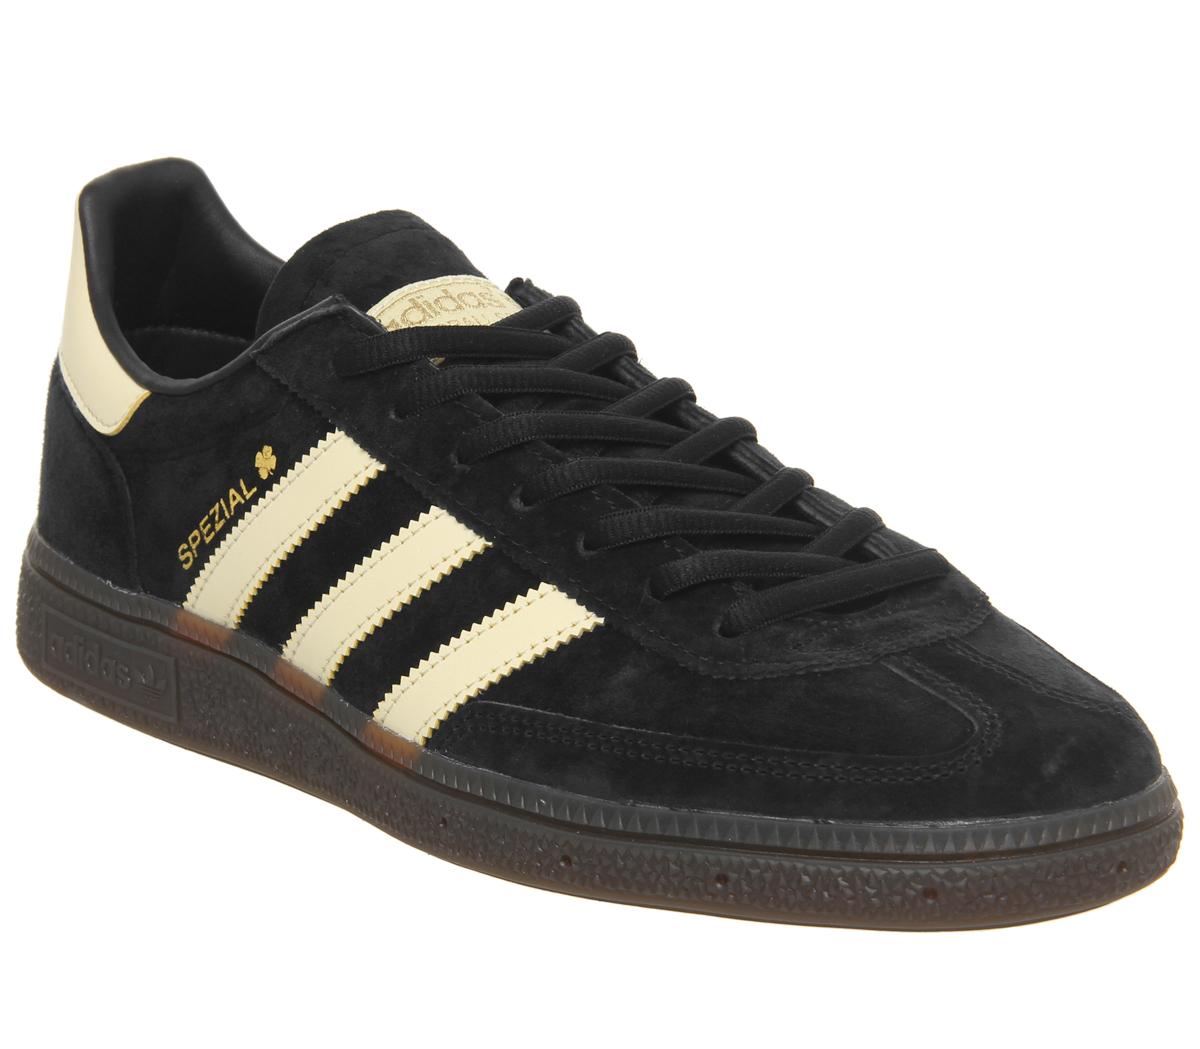 adidas spezial black and gold